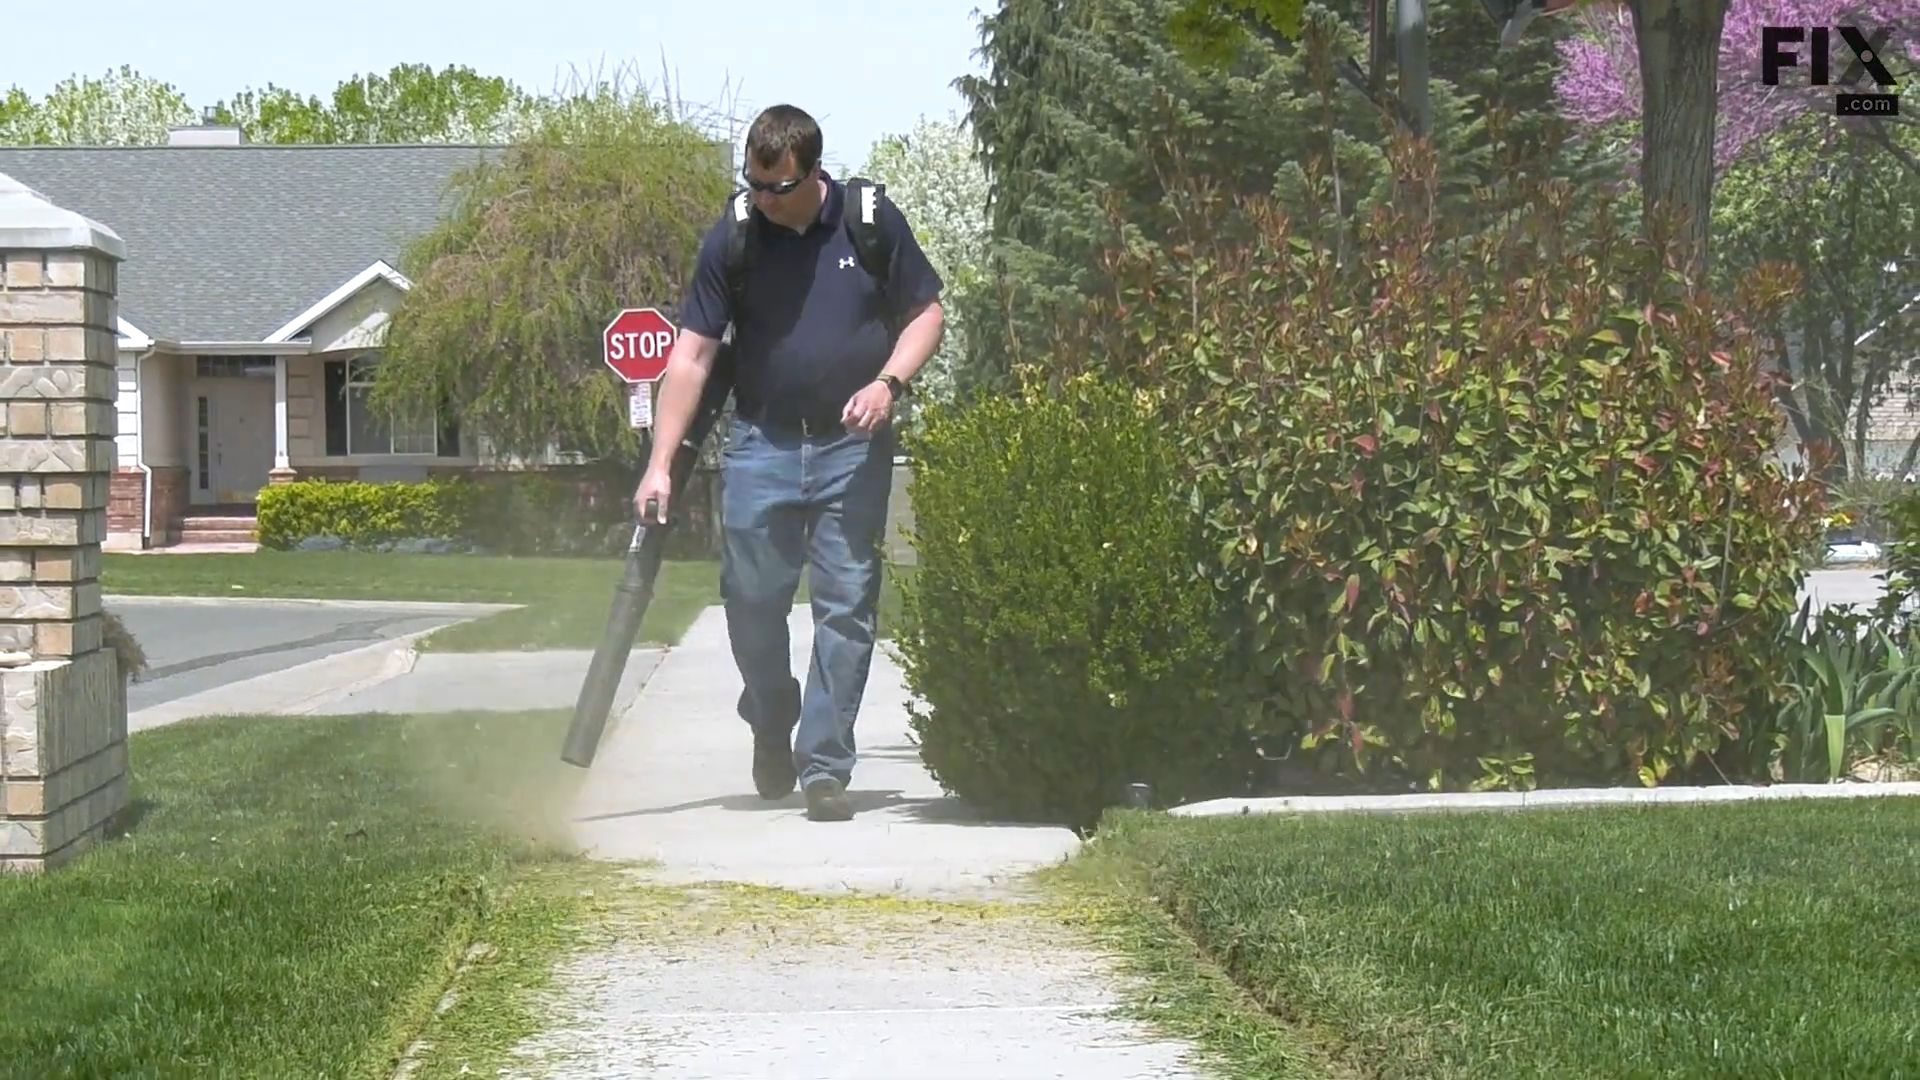 Man in a suburban neighborhood using a backpack leaf blower to clear grass clippings and debris from a sidewalk